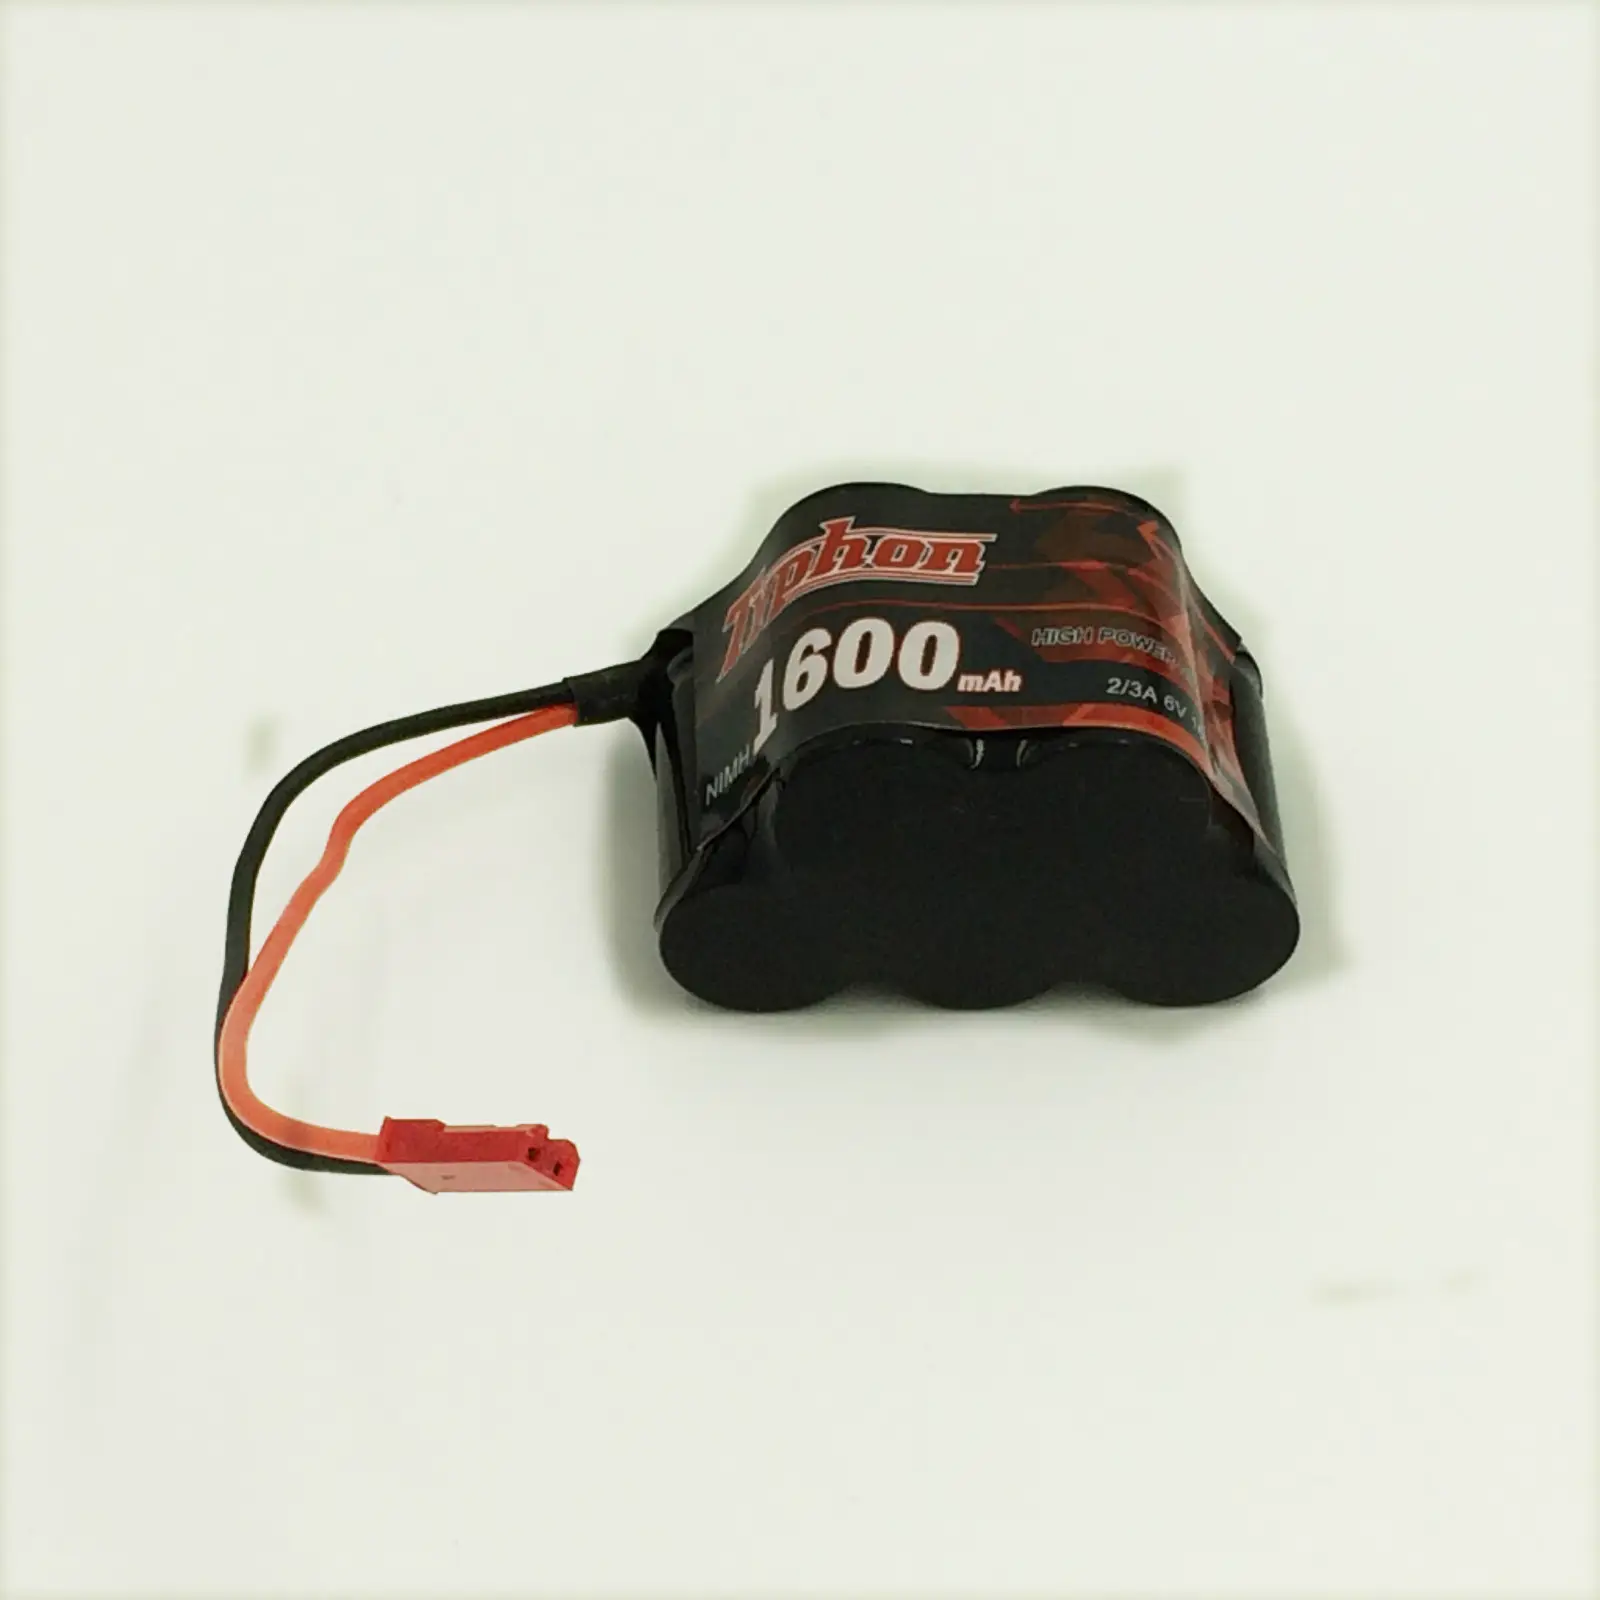 6V 5 Cell 1600mAh NiMH Hump Receiver Battery Pack For 1/10 & 1/8 Traxxas